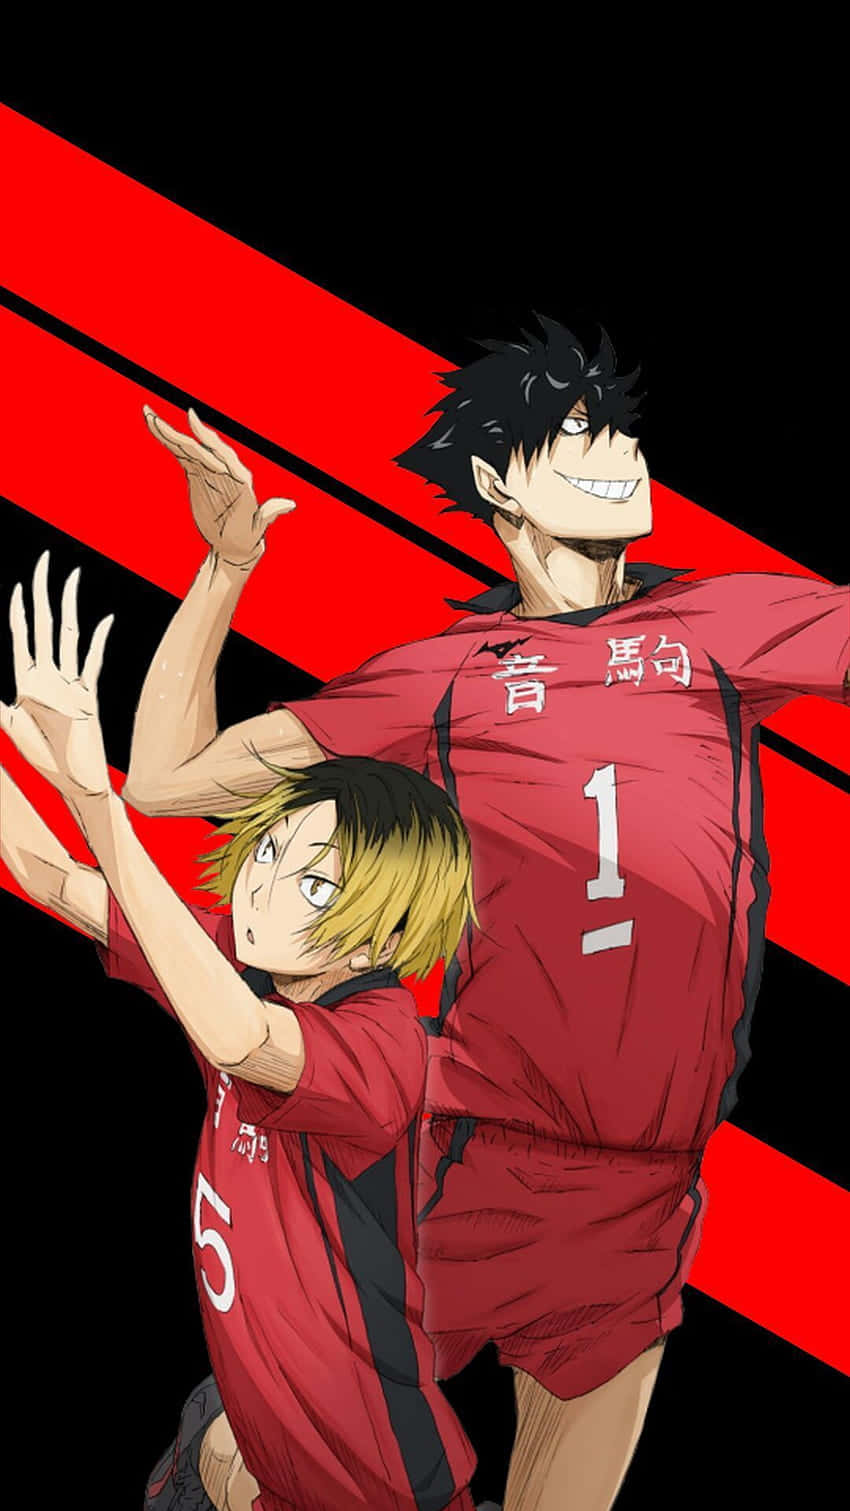 The Nekoma High School Volleyball team are determined to win Wallpaper